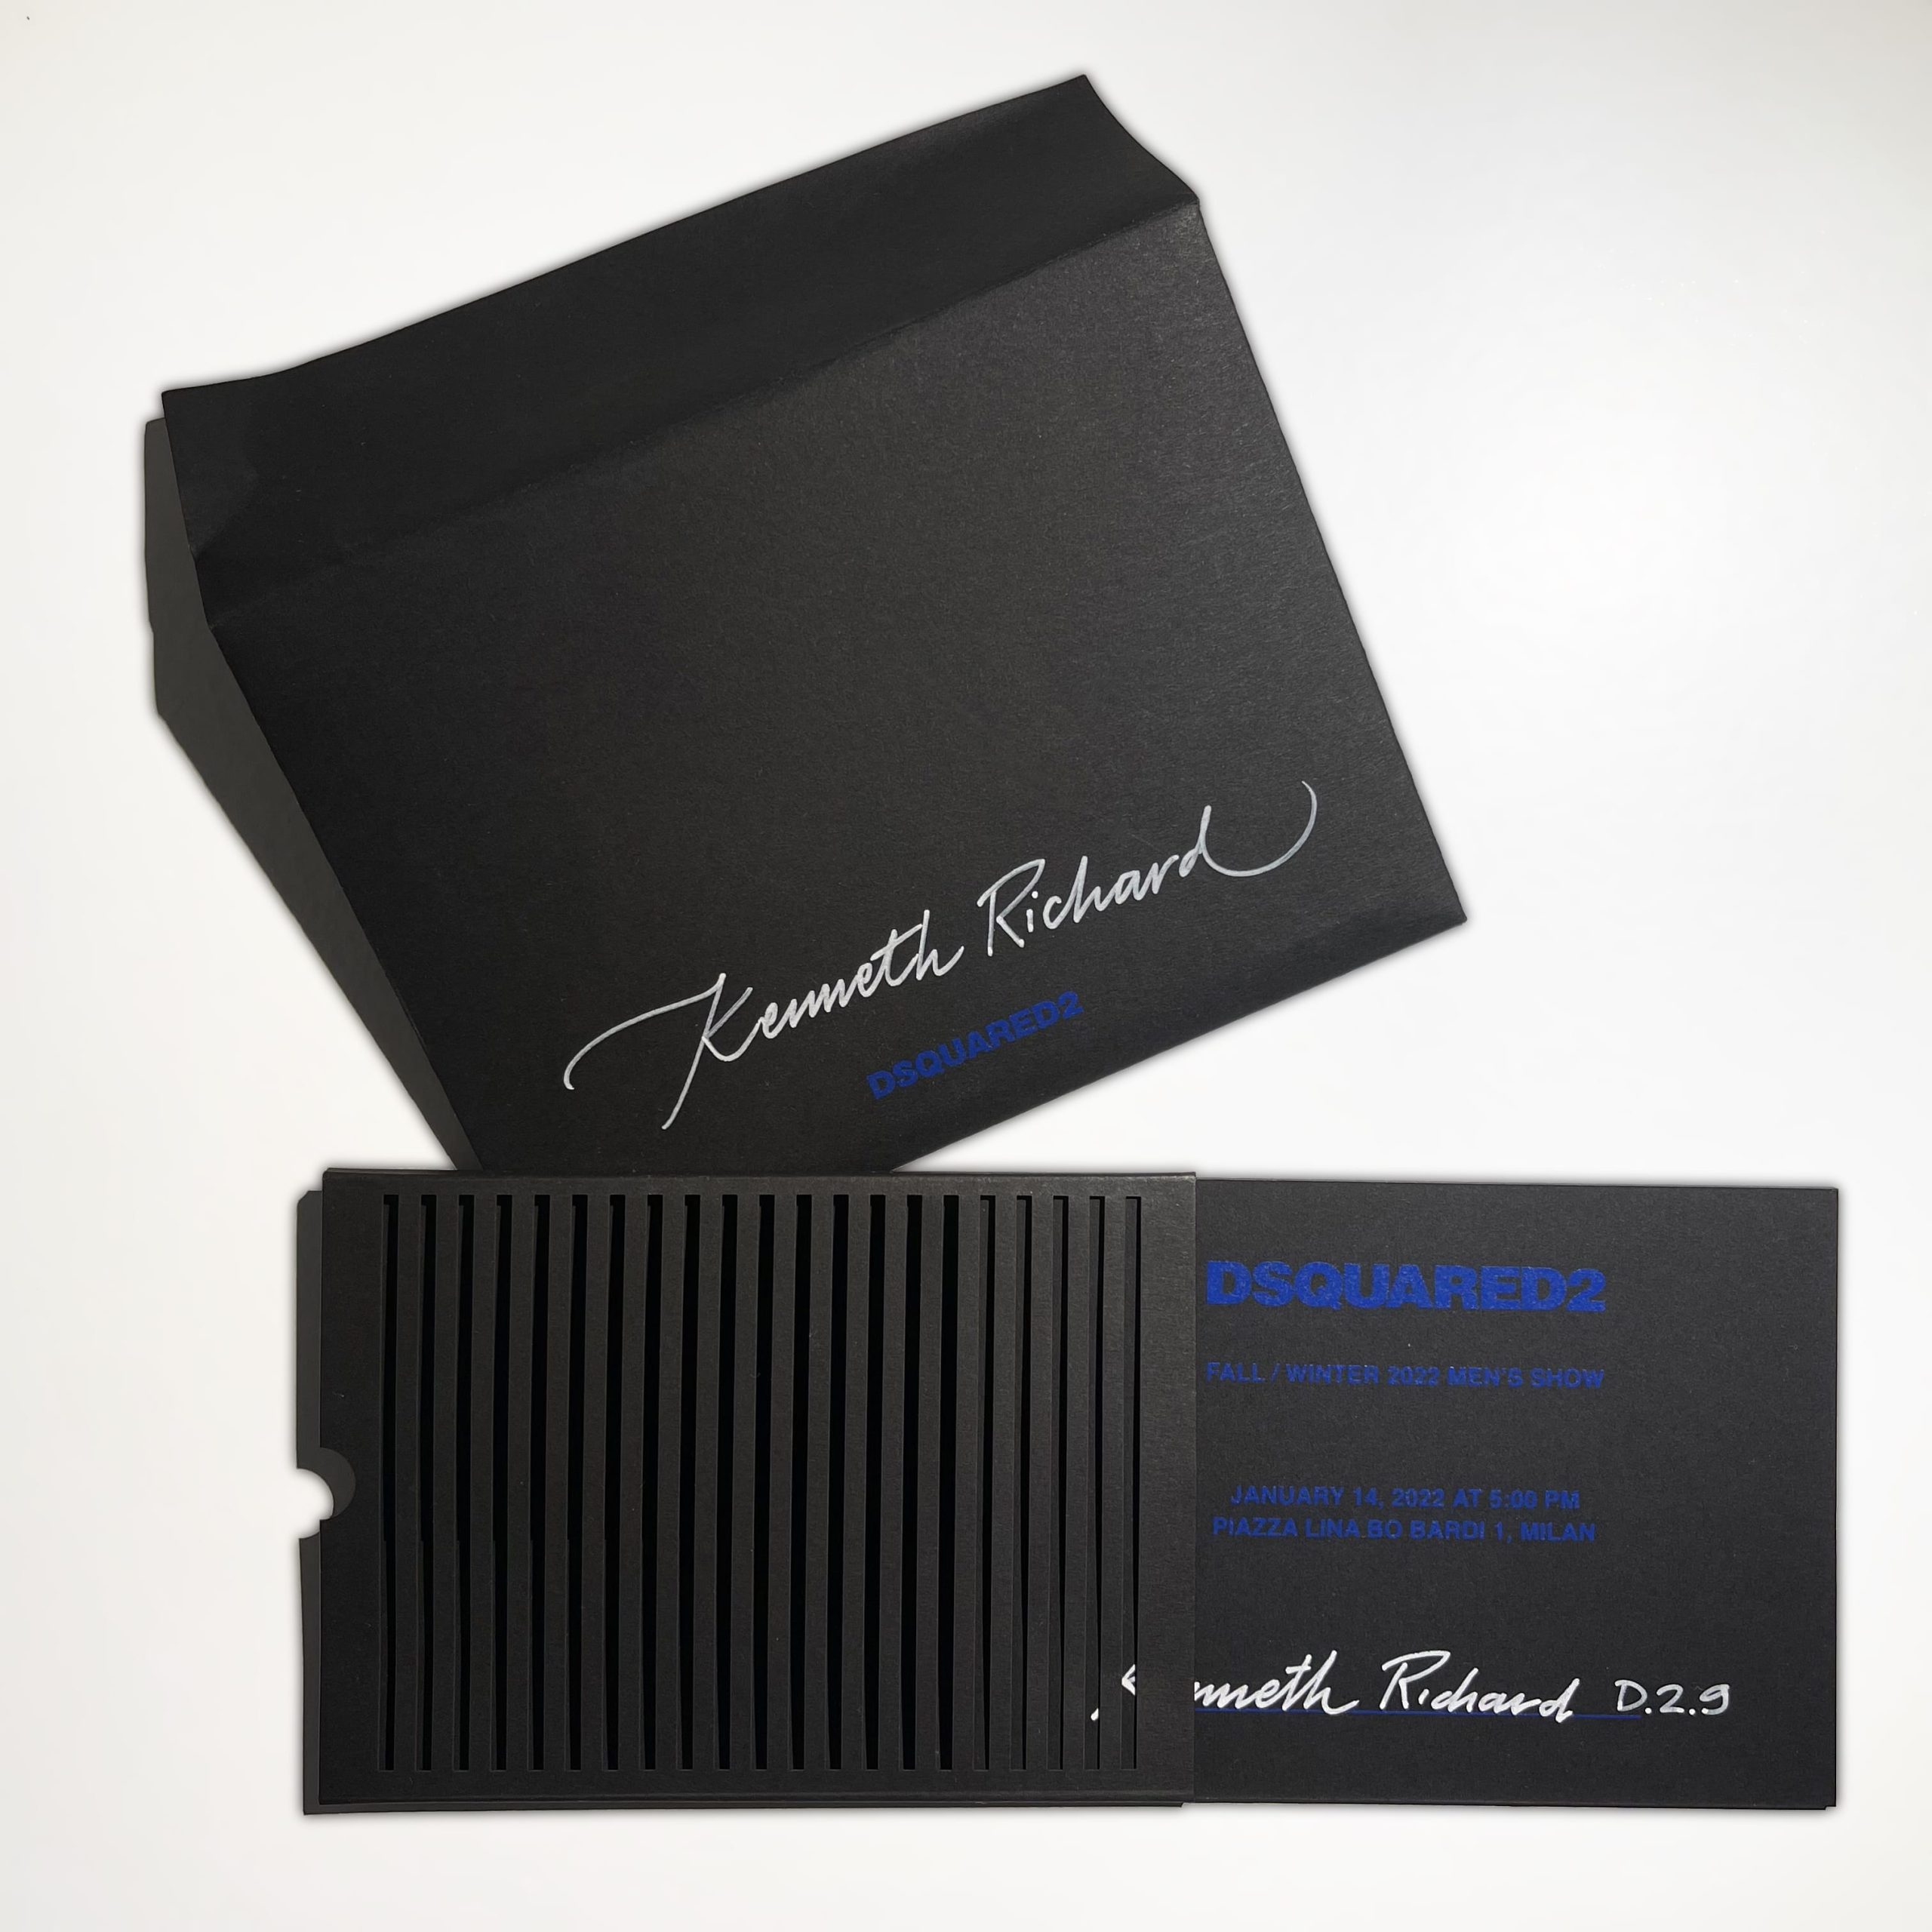 The Best Men's & Couture 2022 Fashion Show Invitations